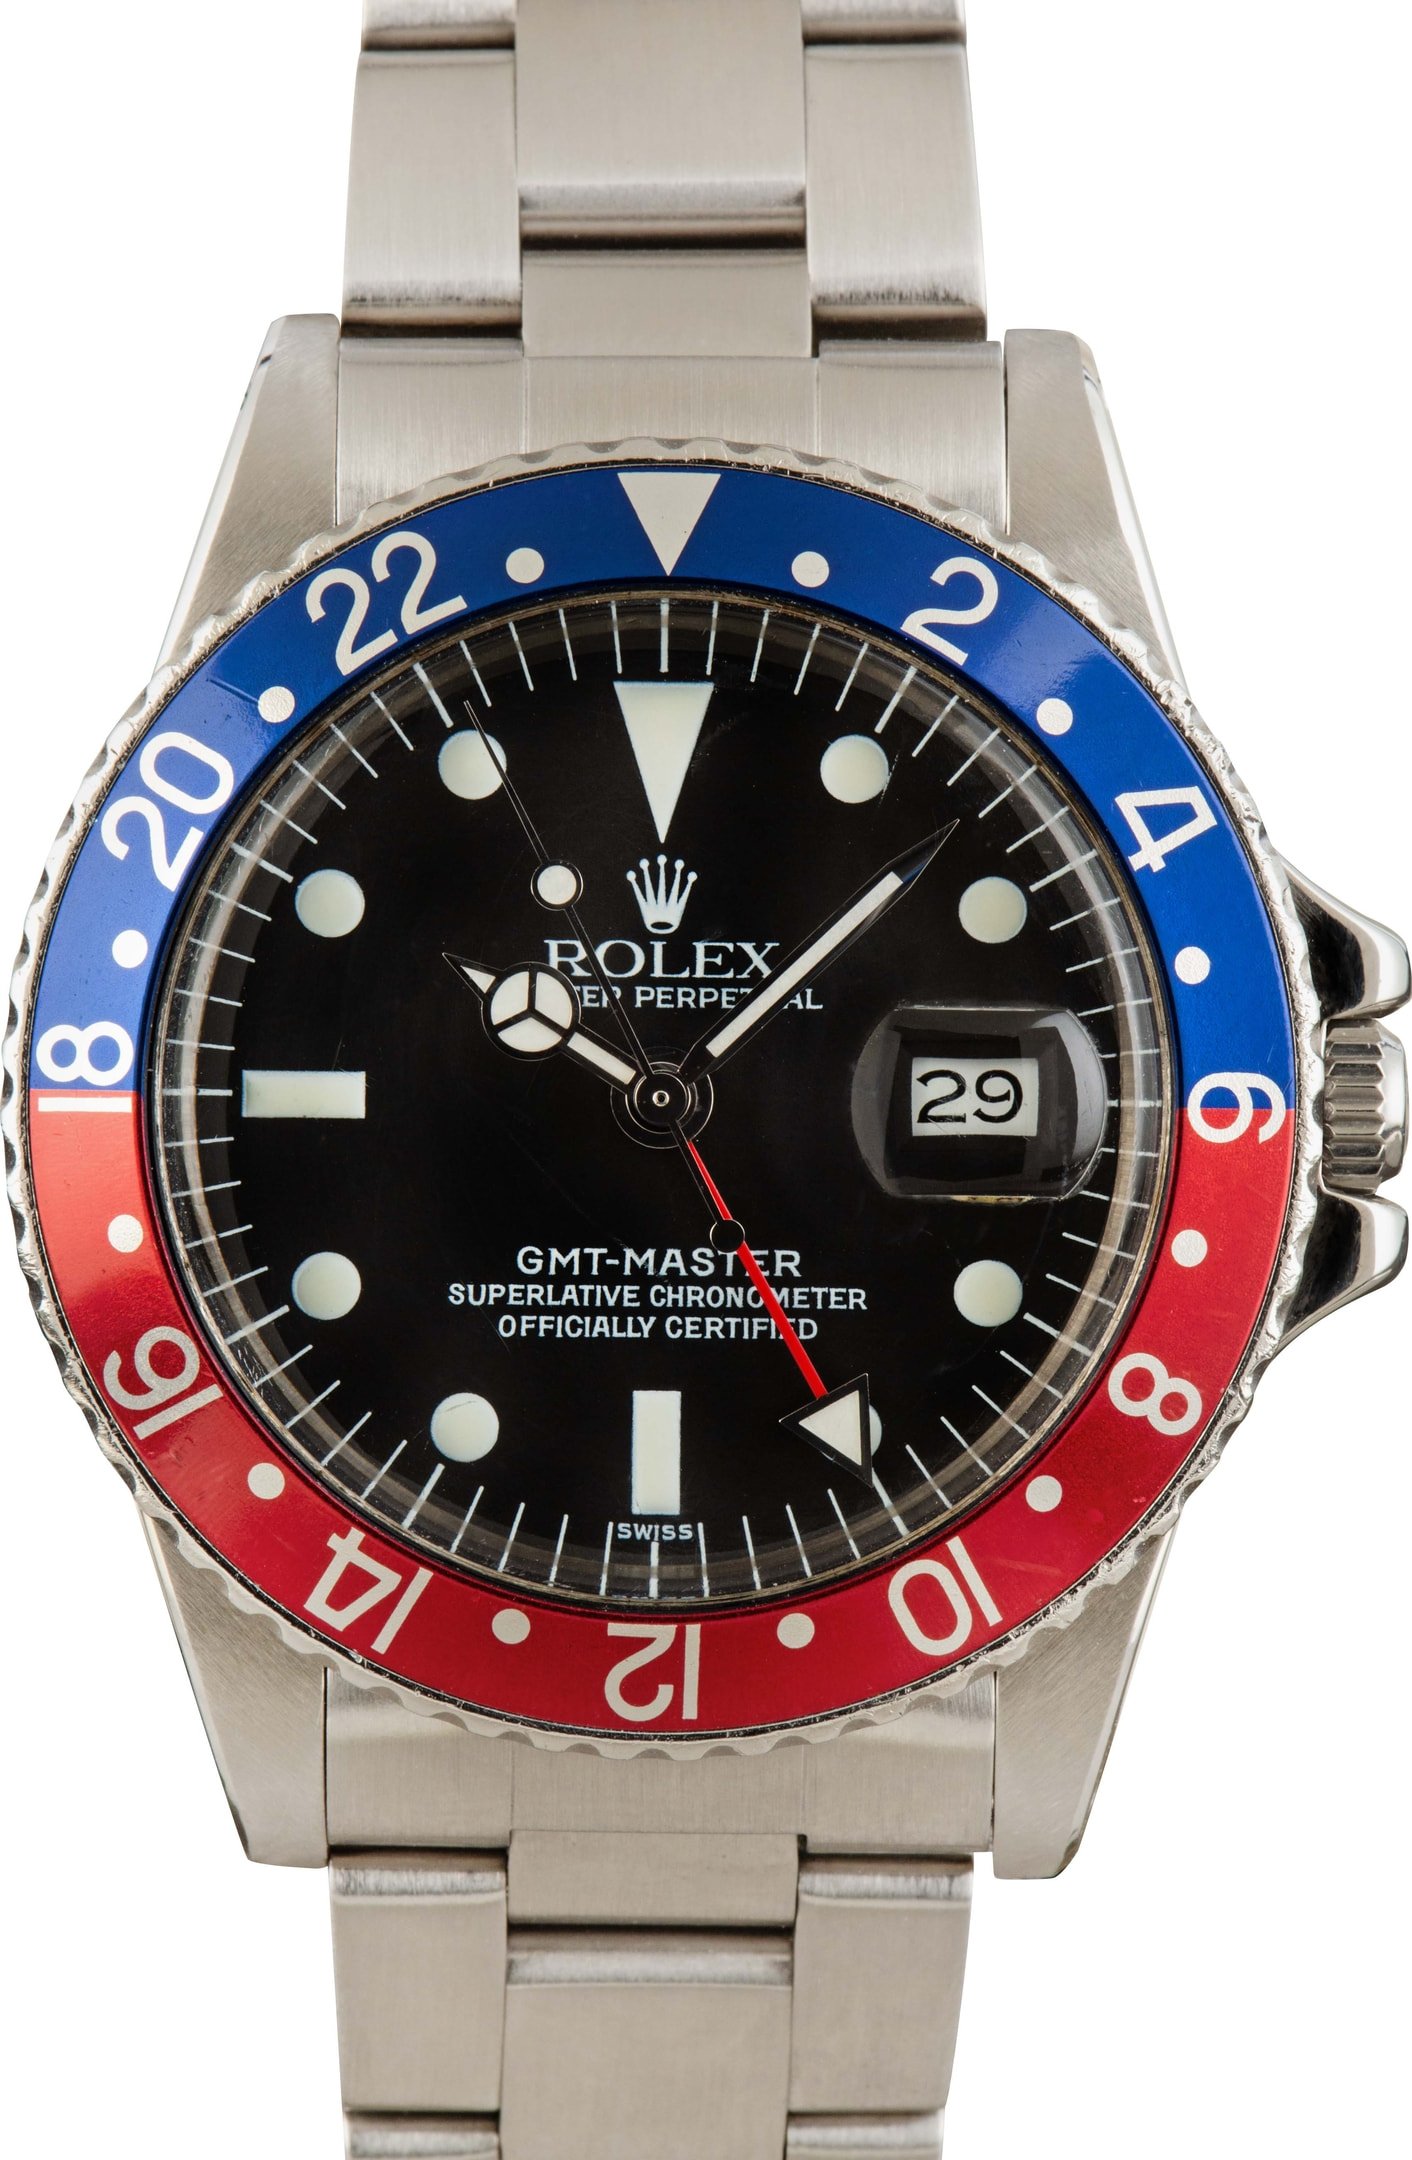 Buy Used Rolex GMT-Master 1675 | Bob's Watches - Sku: 161474